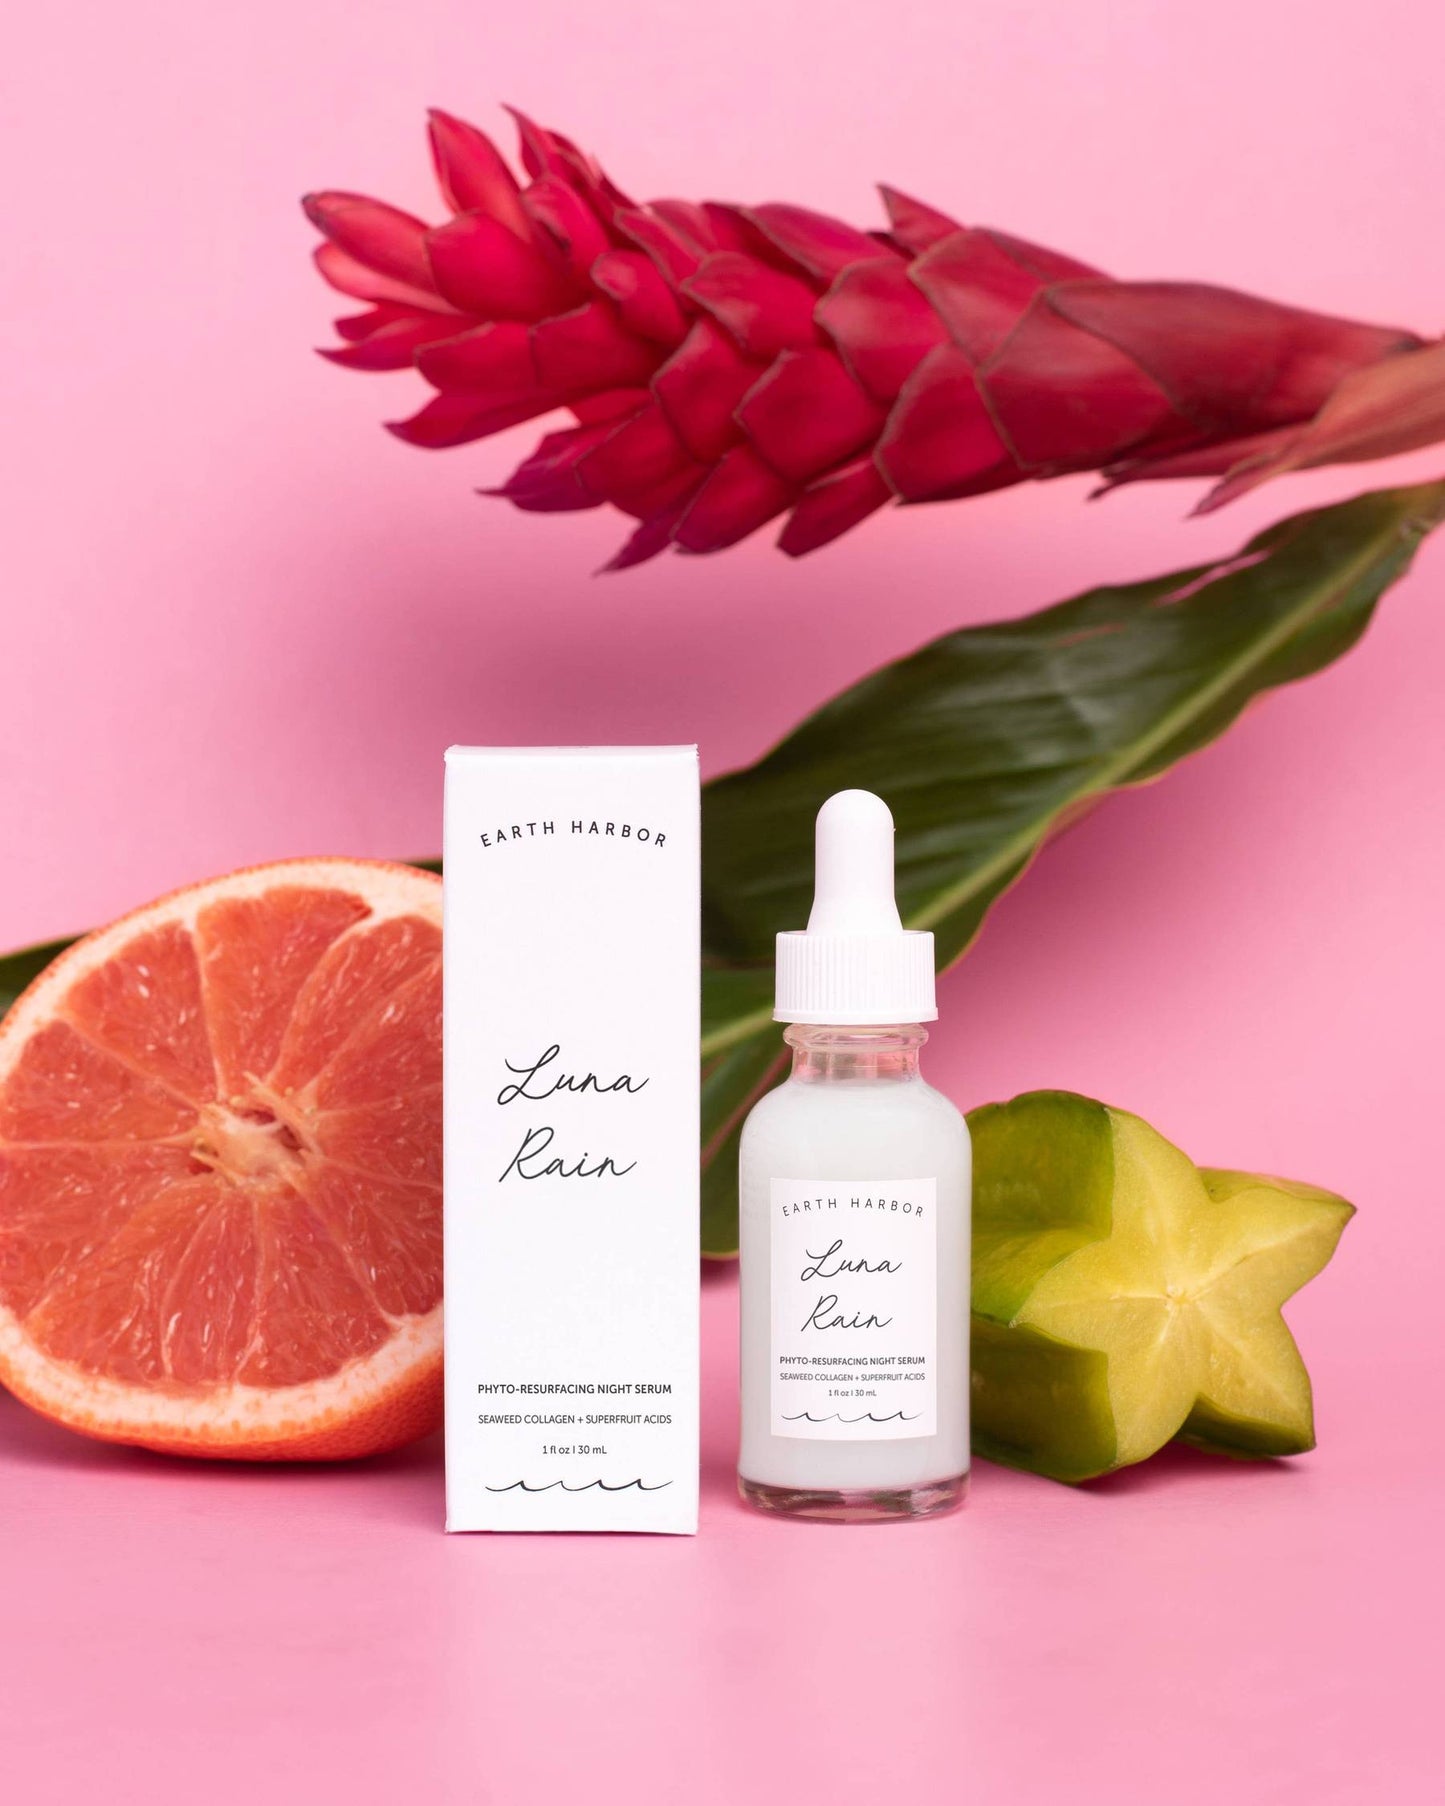 a bottle of earth harbor luna rain night serum next to a grapefruit and a flower